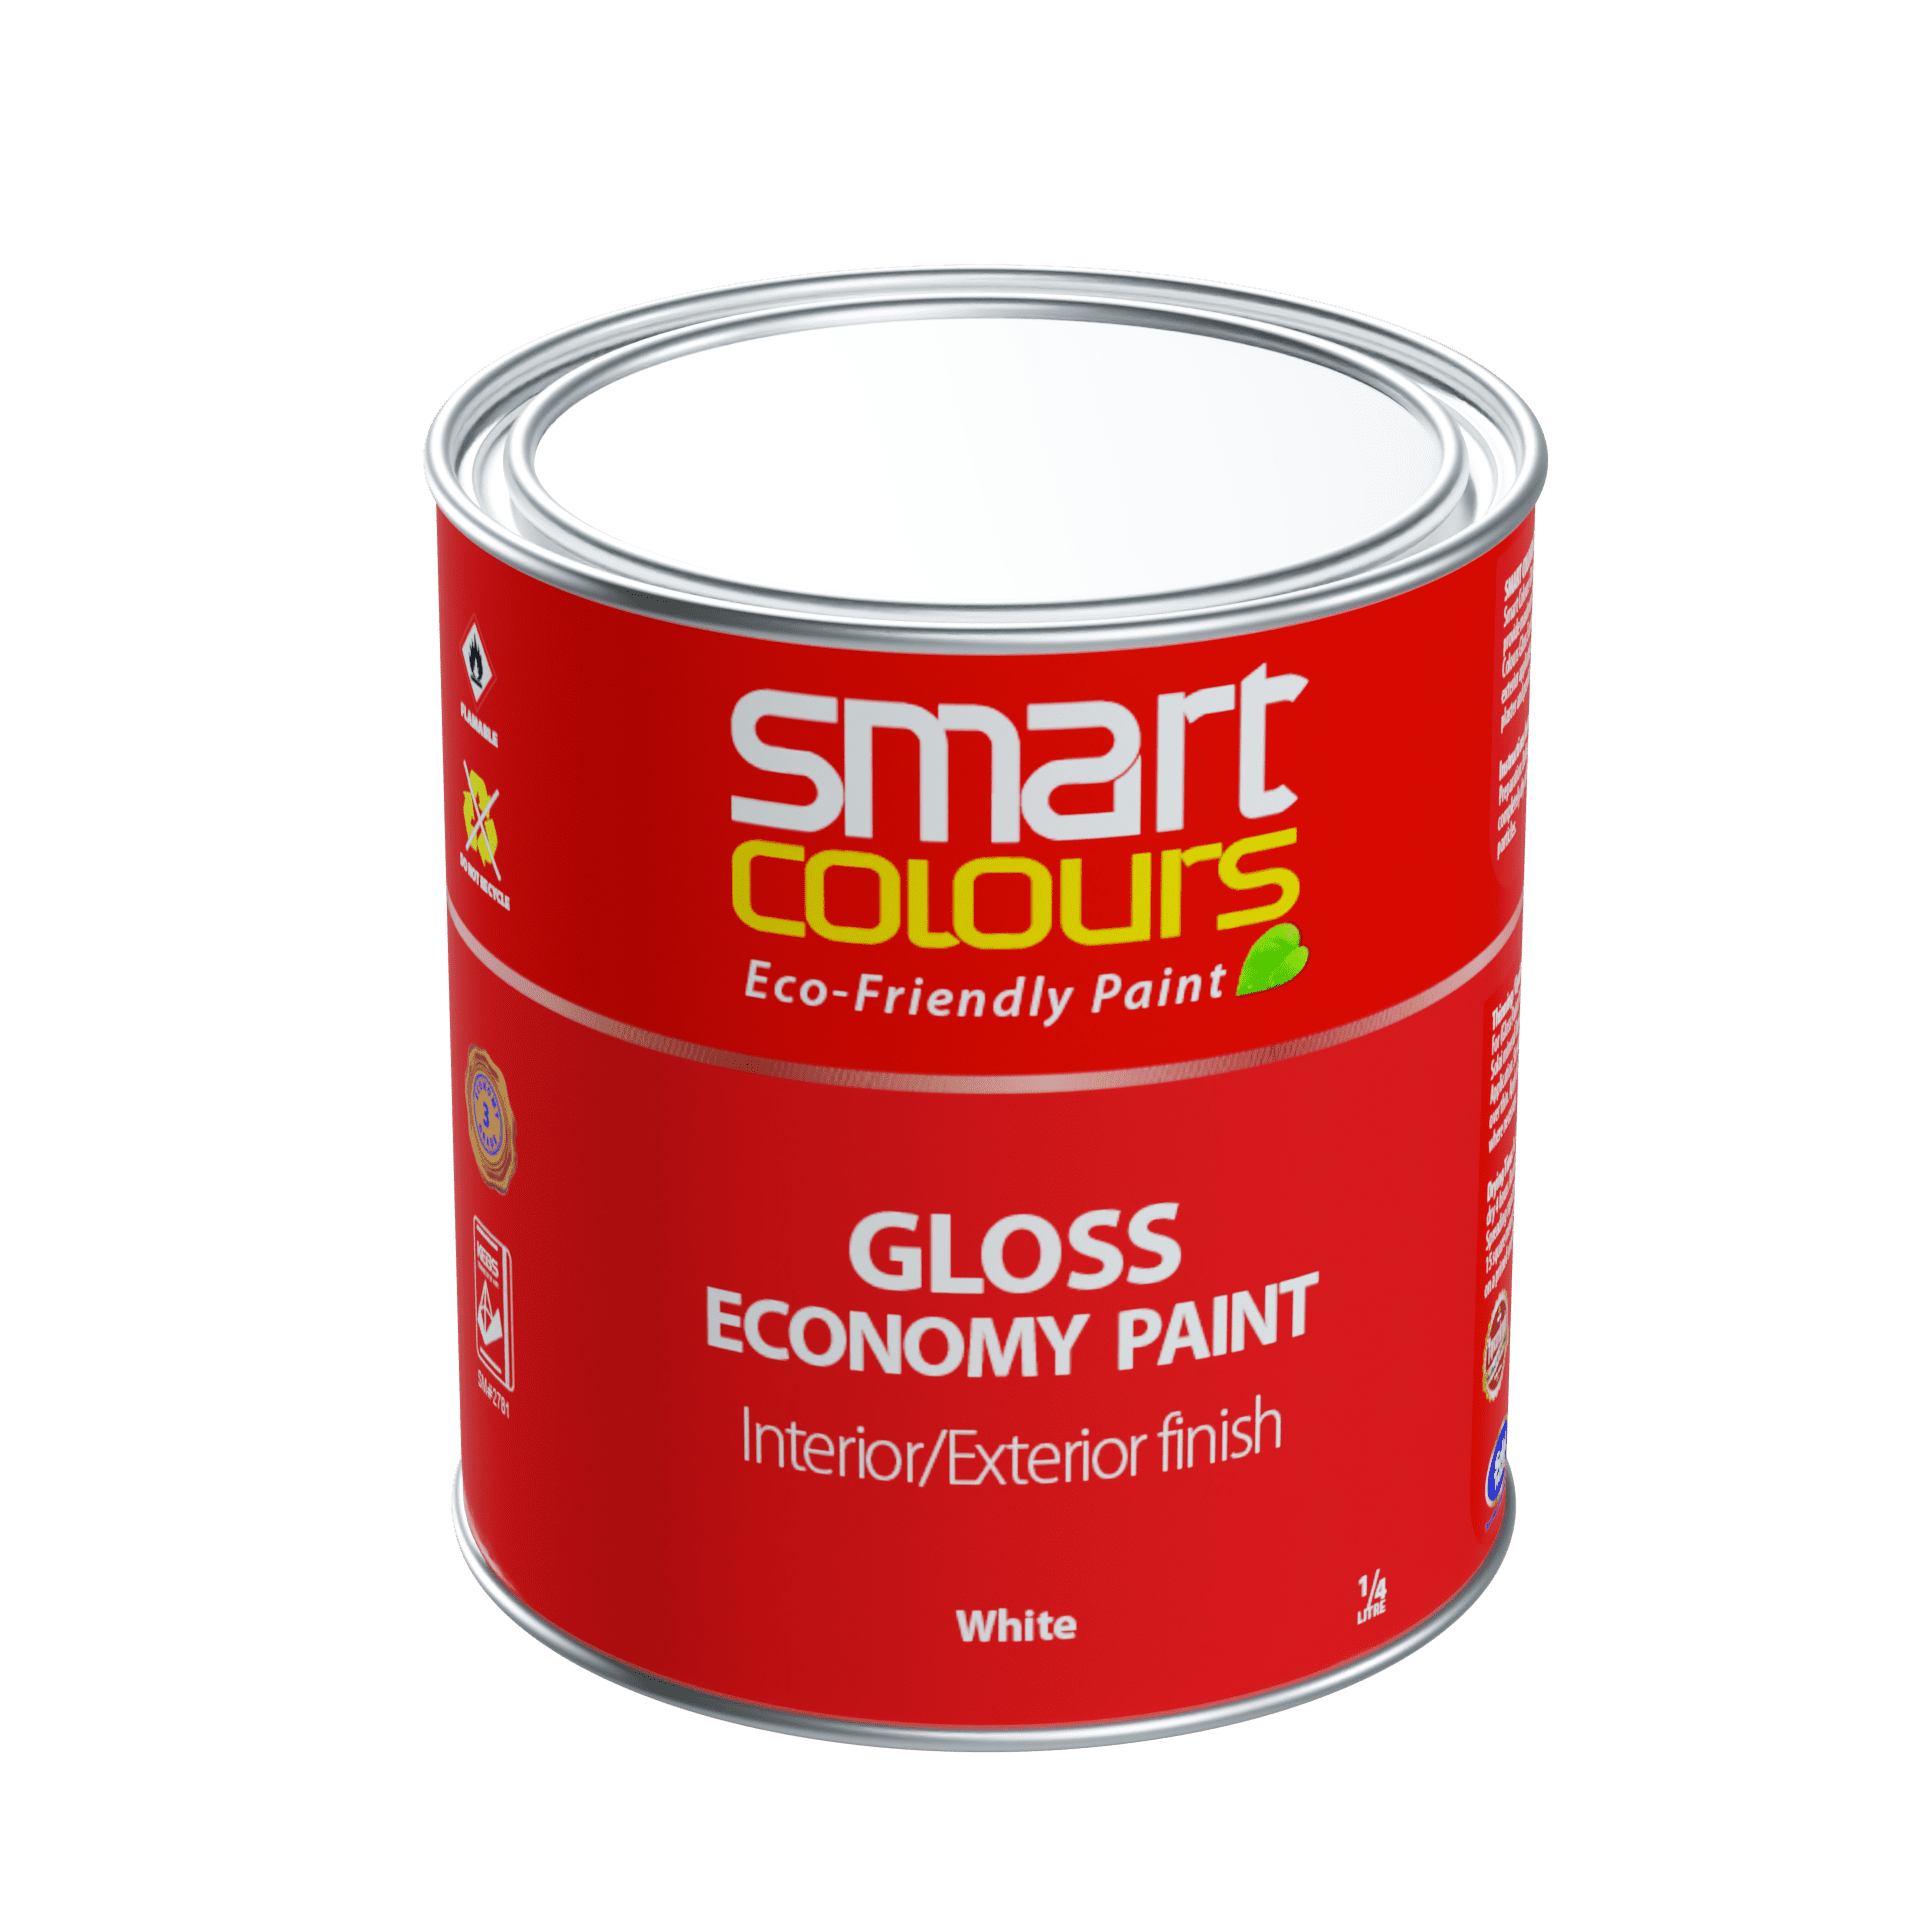 Economy Gloss, Most affordable Gloss Paint in Kenya, Shiny Paint, Lead Free Paint.